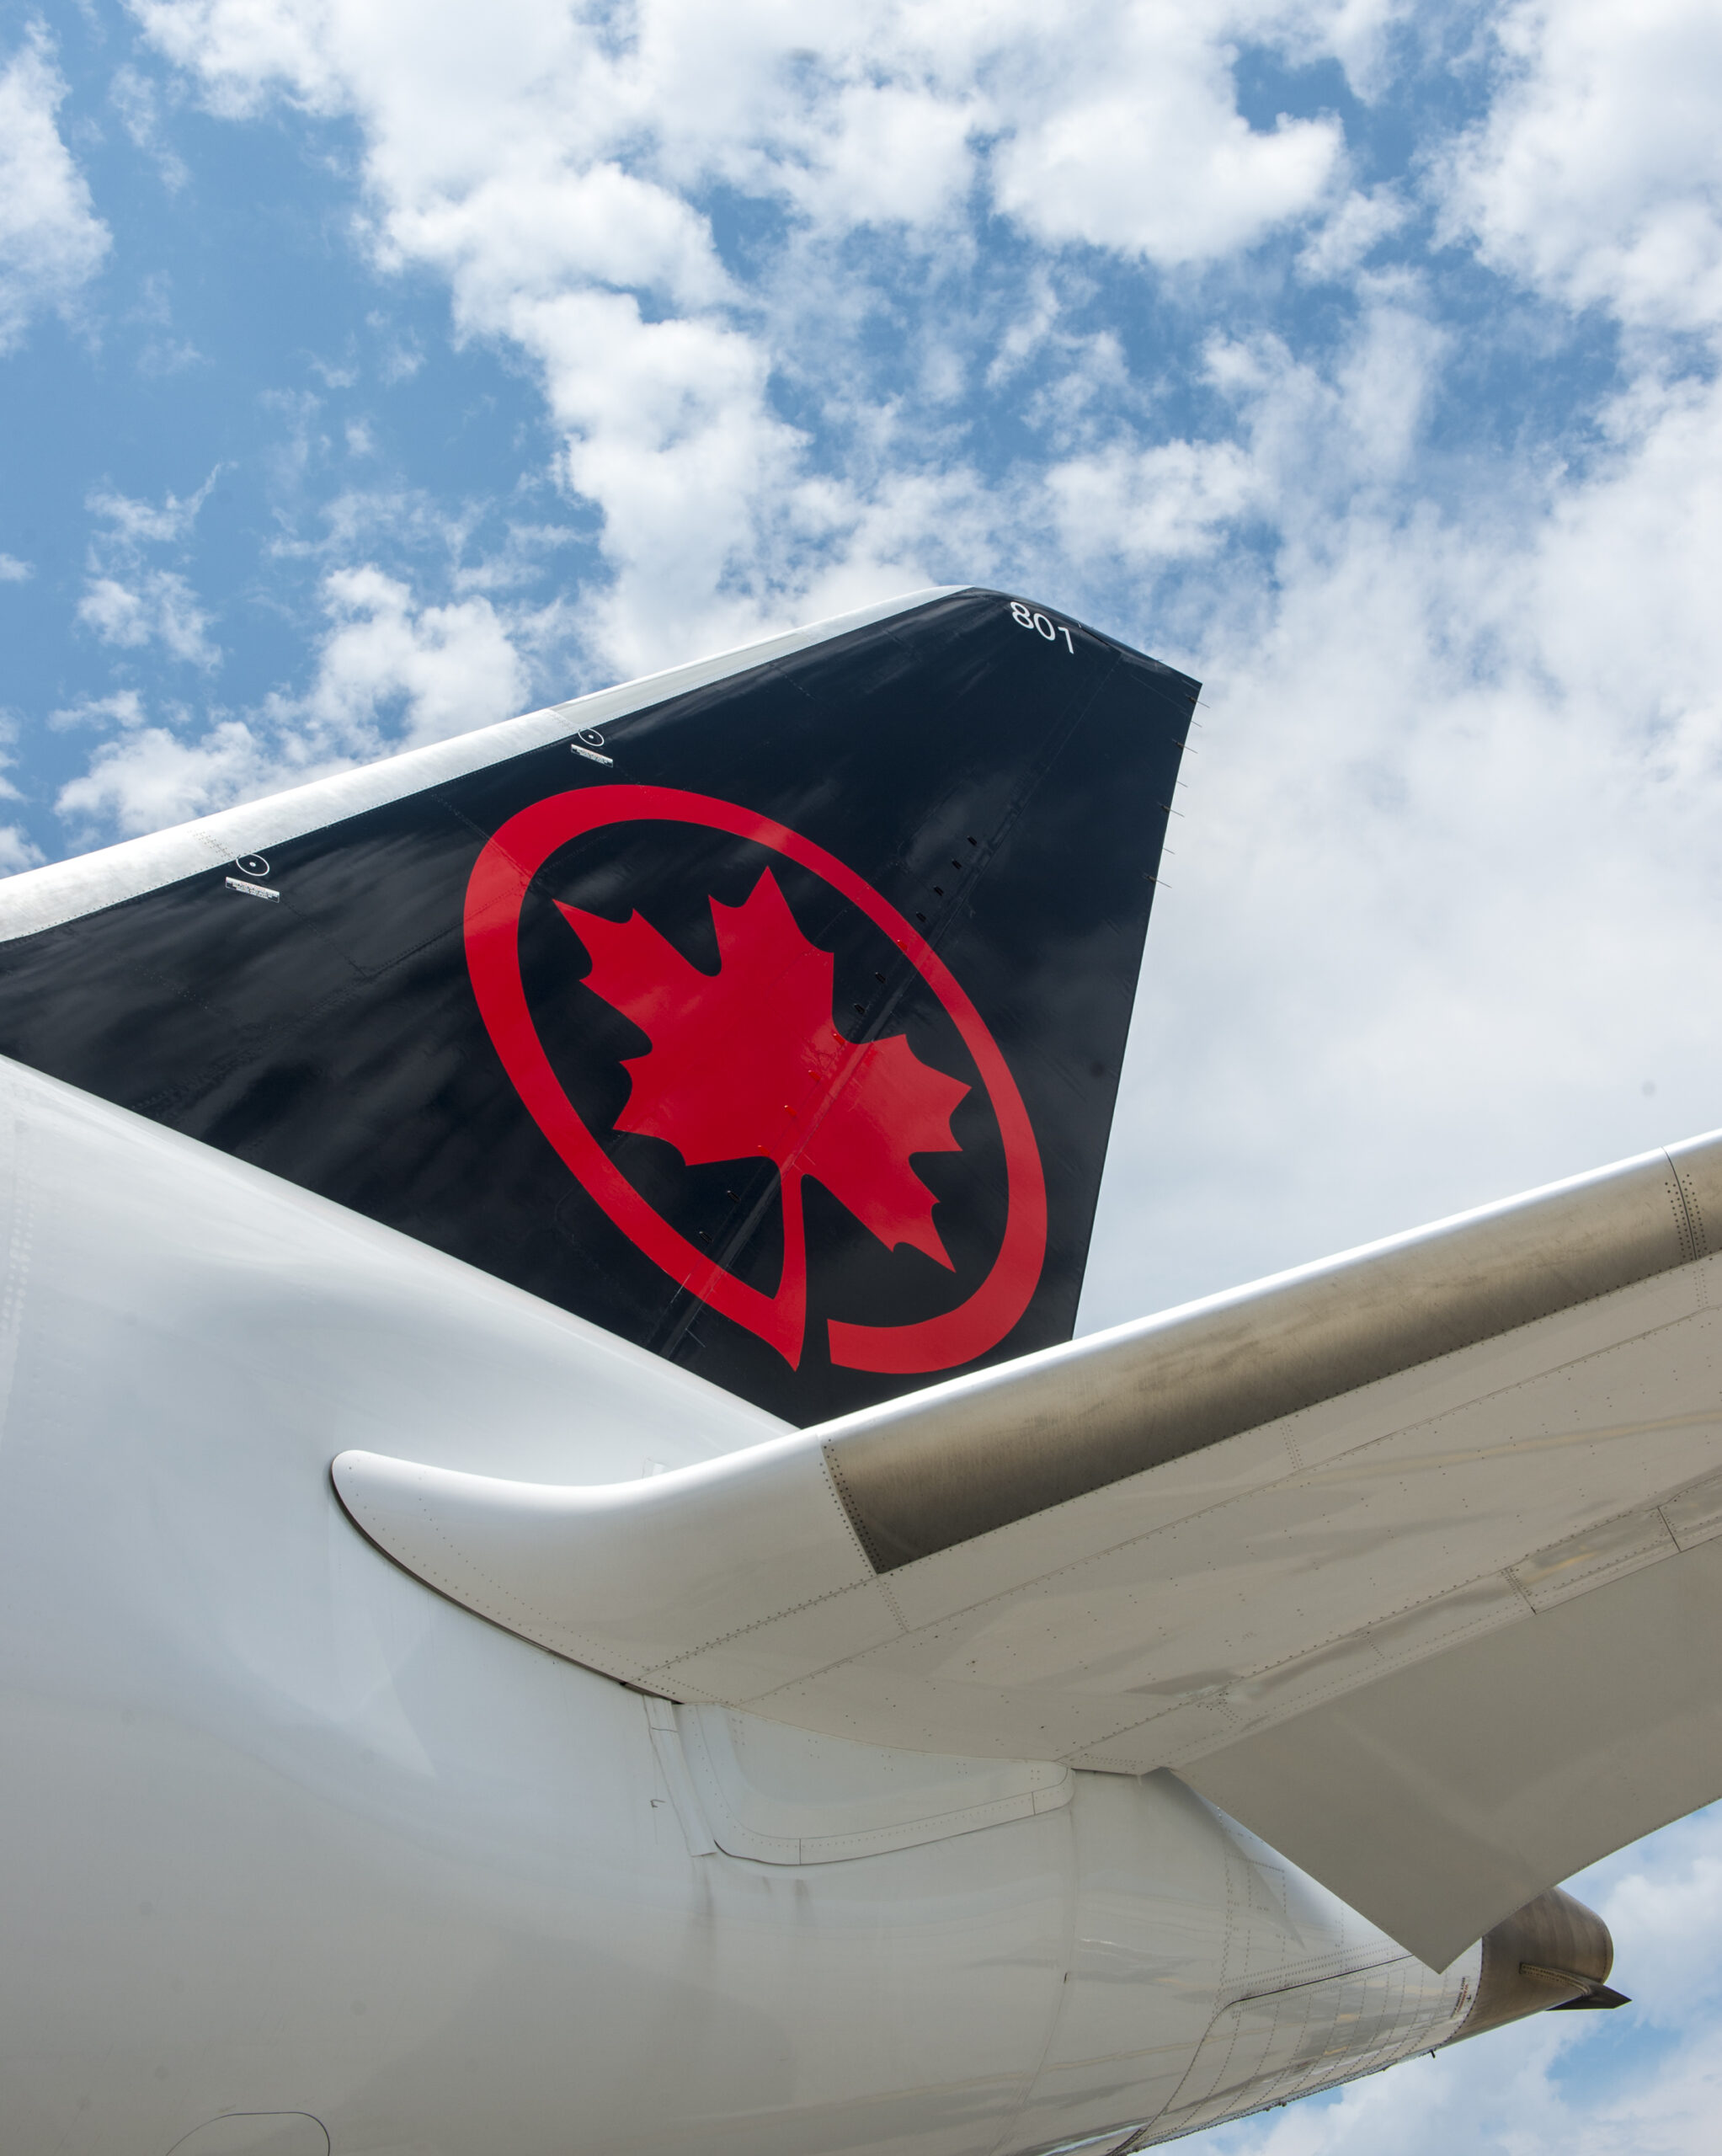 Air Canada Adds Six New Flights and Increases Service to Europe and Asia - The Bulkhead Seat